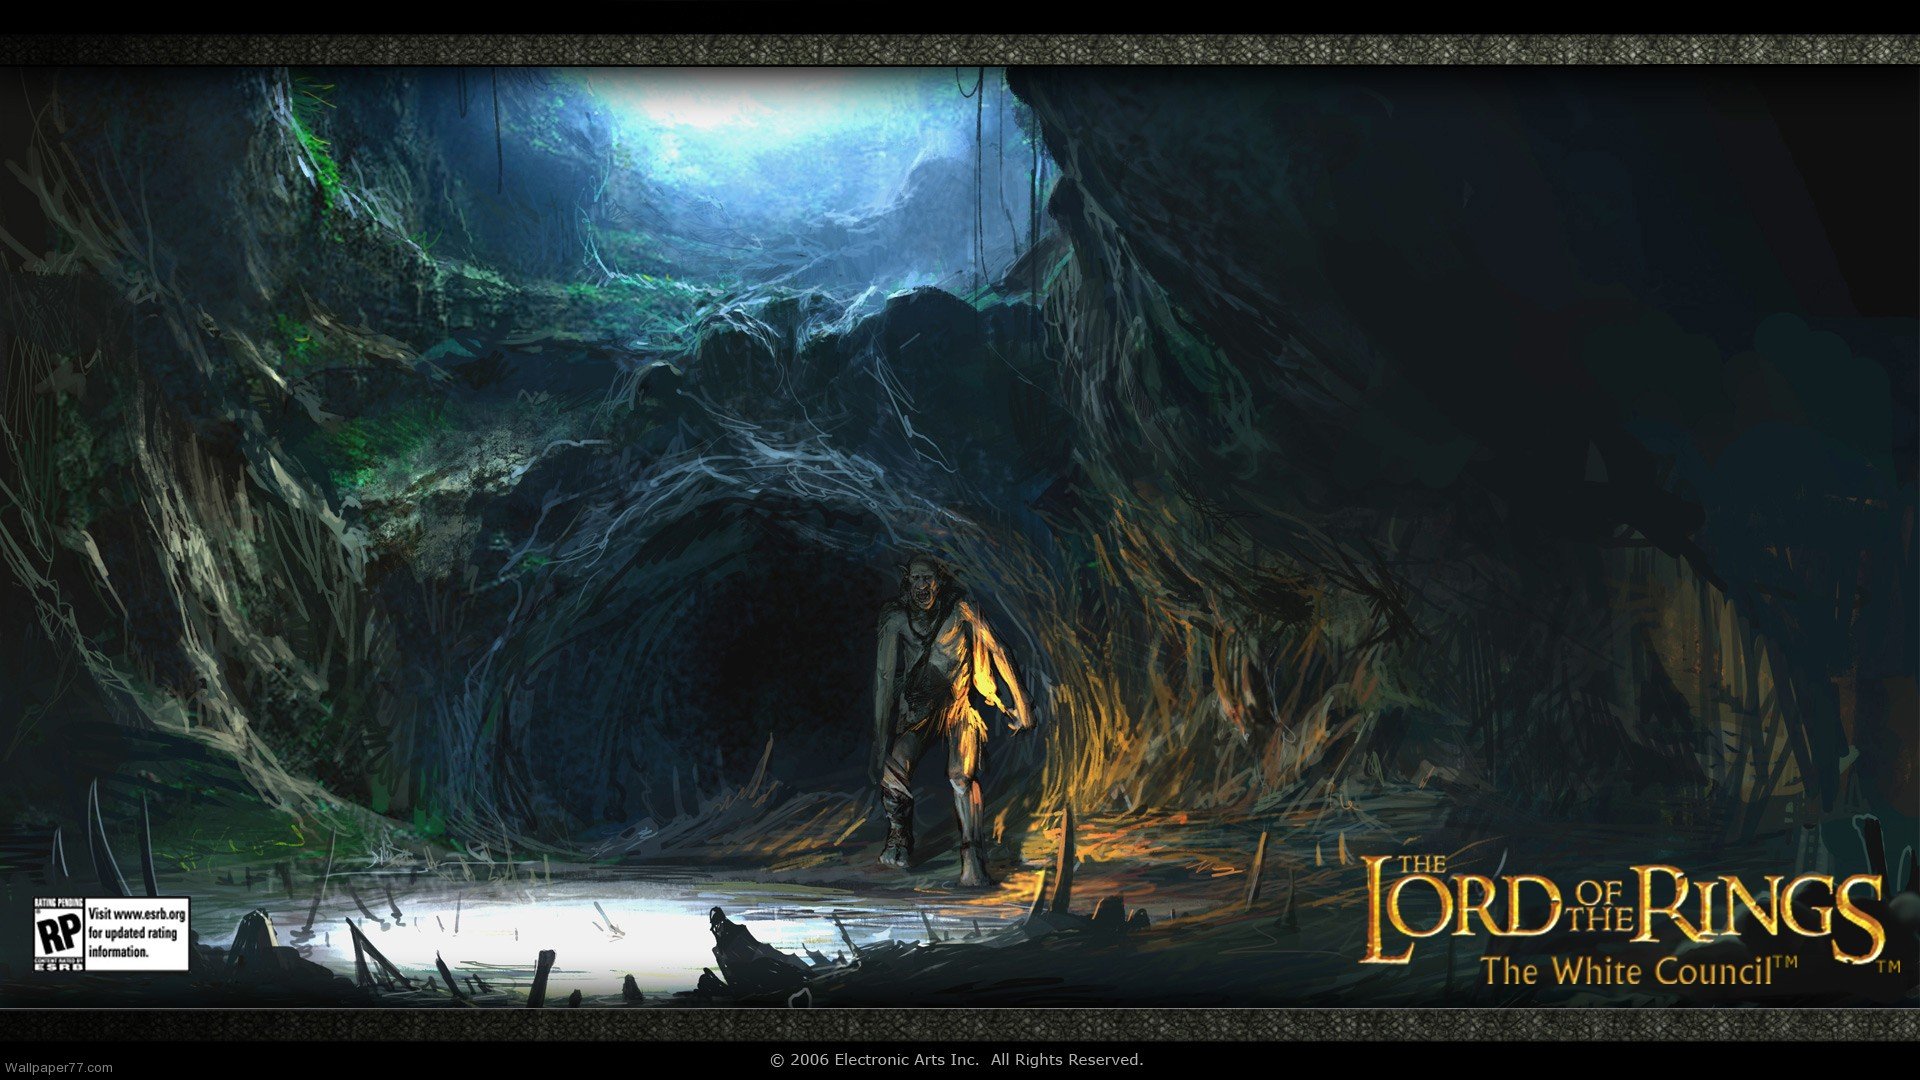 Lord of the Rings Wallpaper 3 lord of the rings wallpaperslord of the